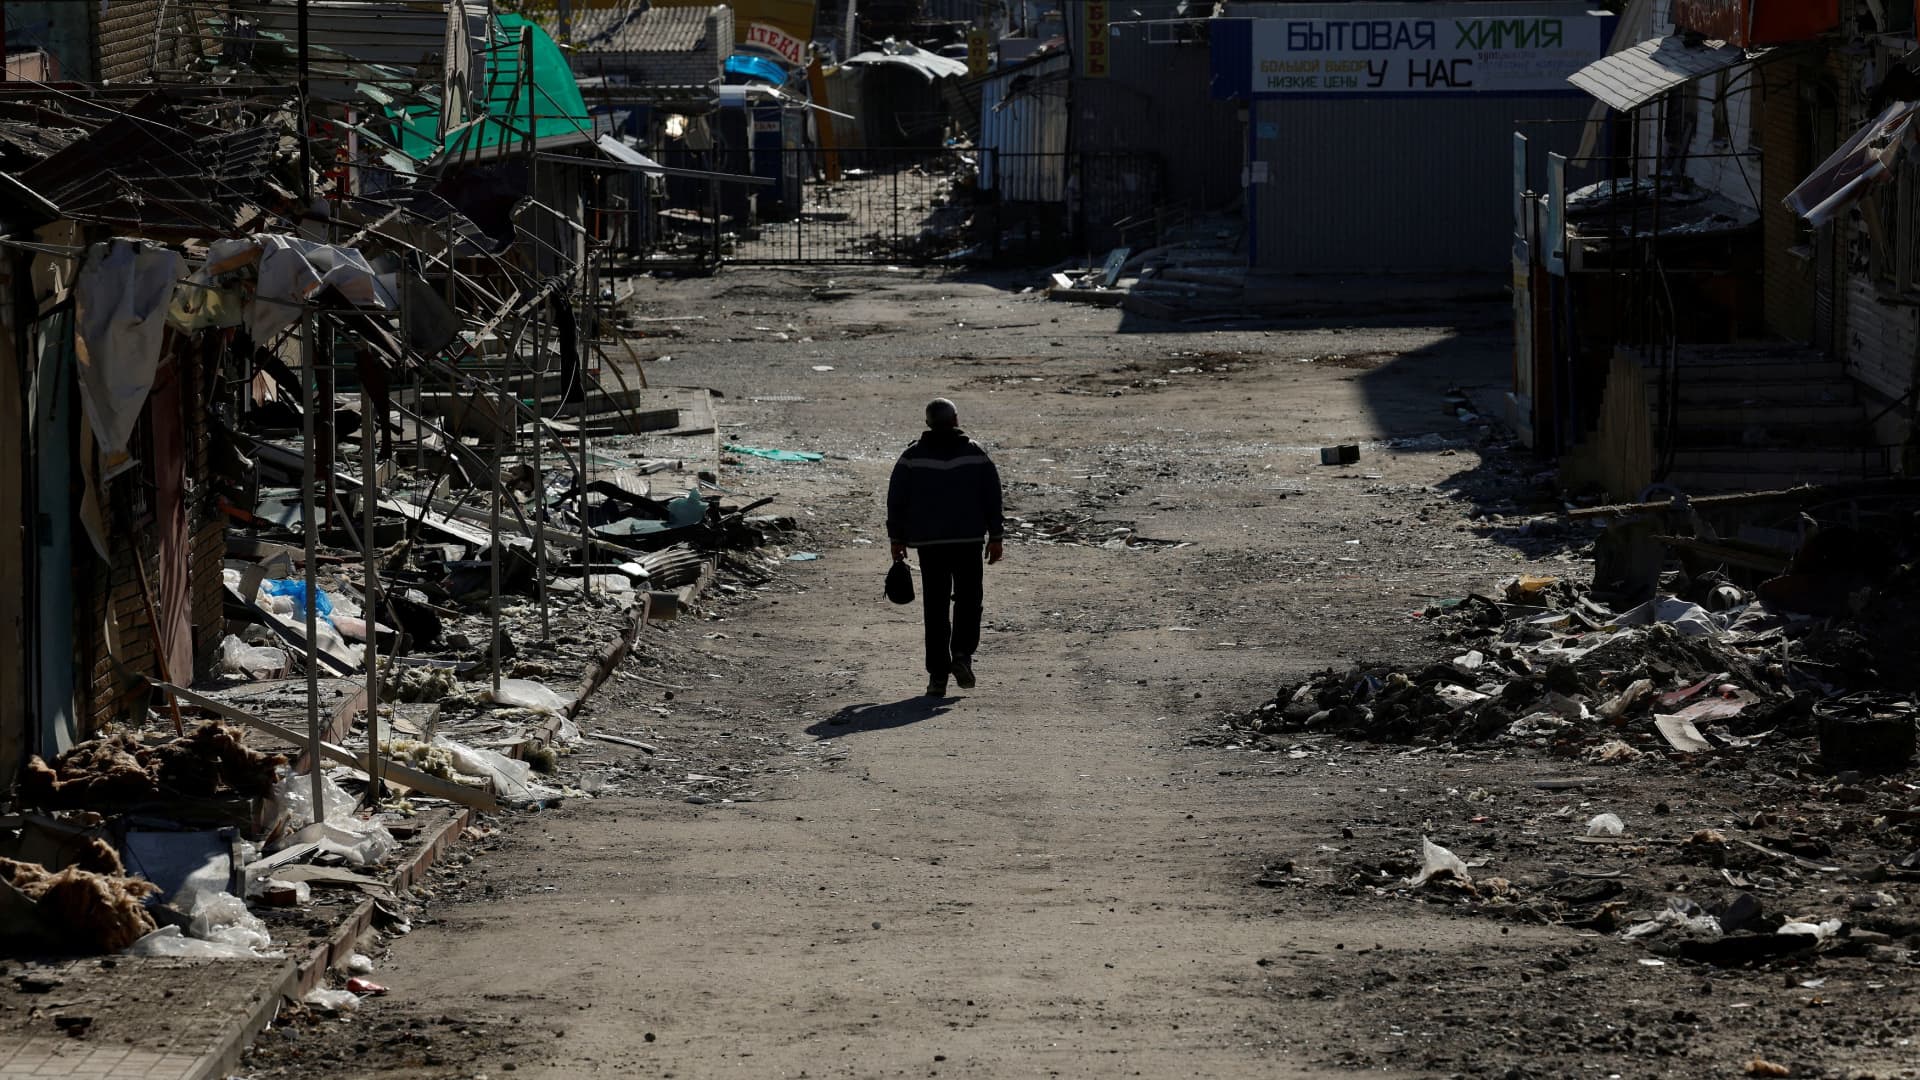 A man walks through a shopping street destroyed by Russian strikes, amid Russia's attack on Ukraine, in the recently retaken town of Kupiansk, Ukraine, October 18, 2022.